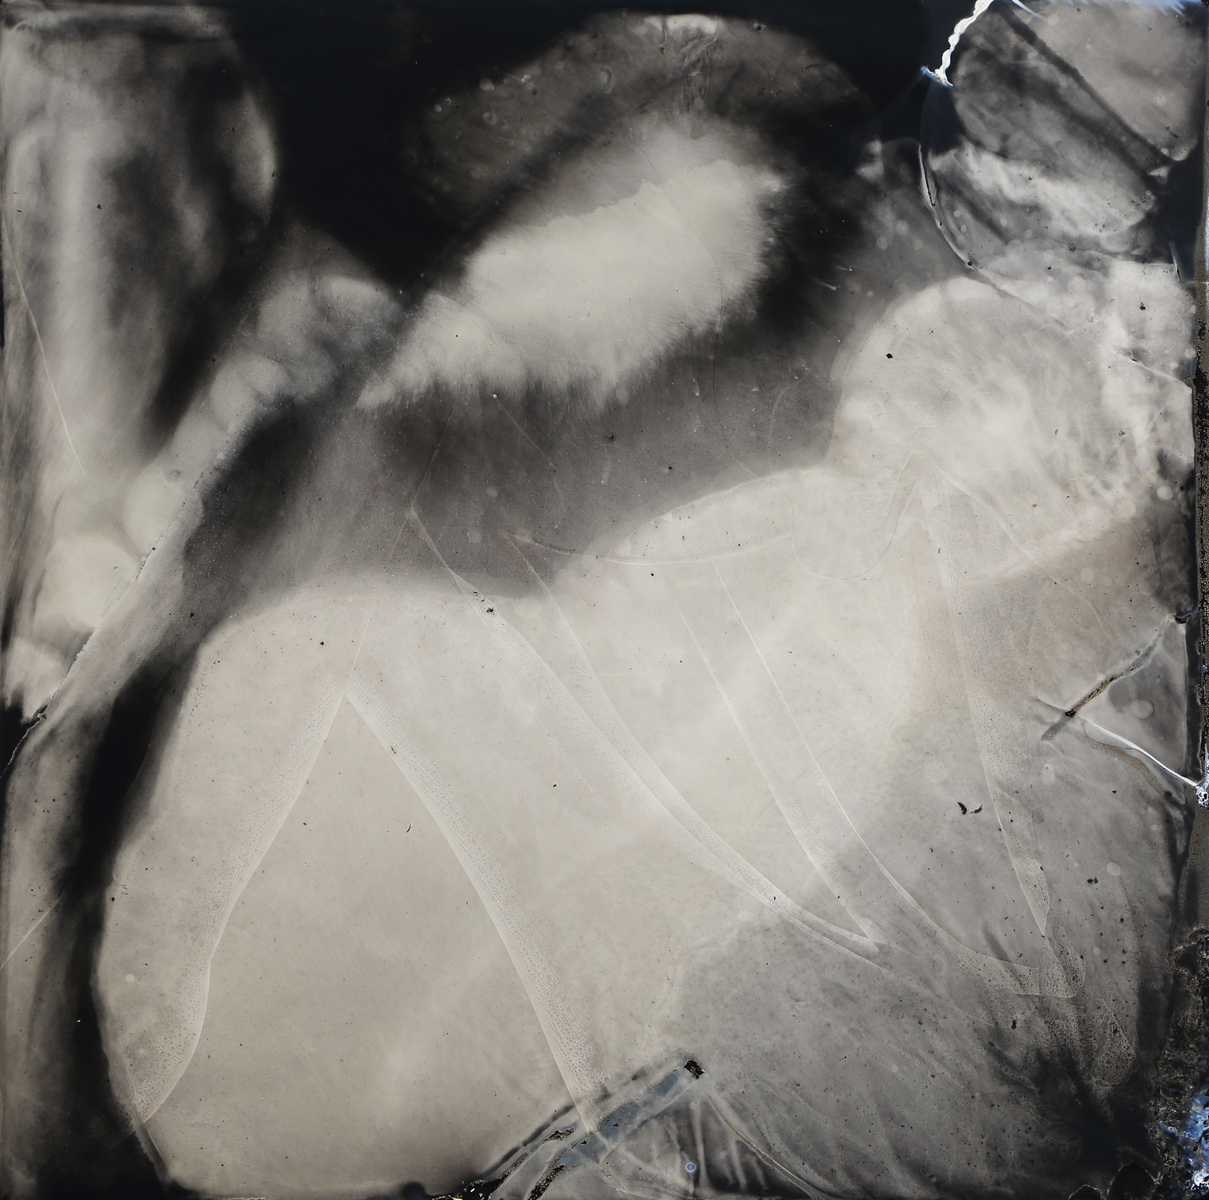 11:57 PM, October 2, 2015. Collodion tintype, 24x24 inches.